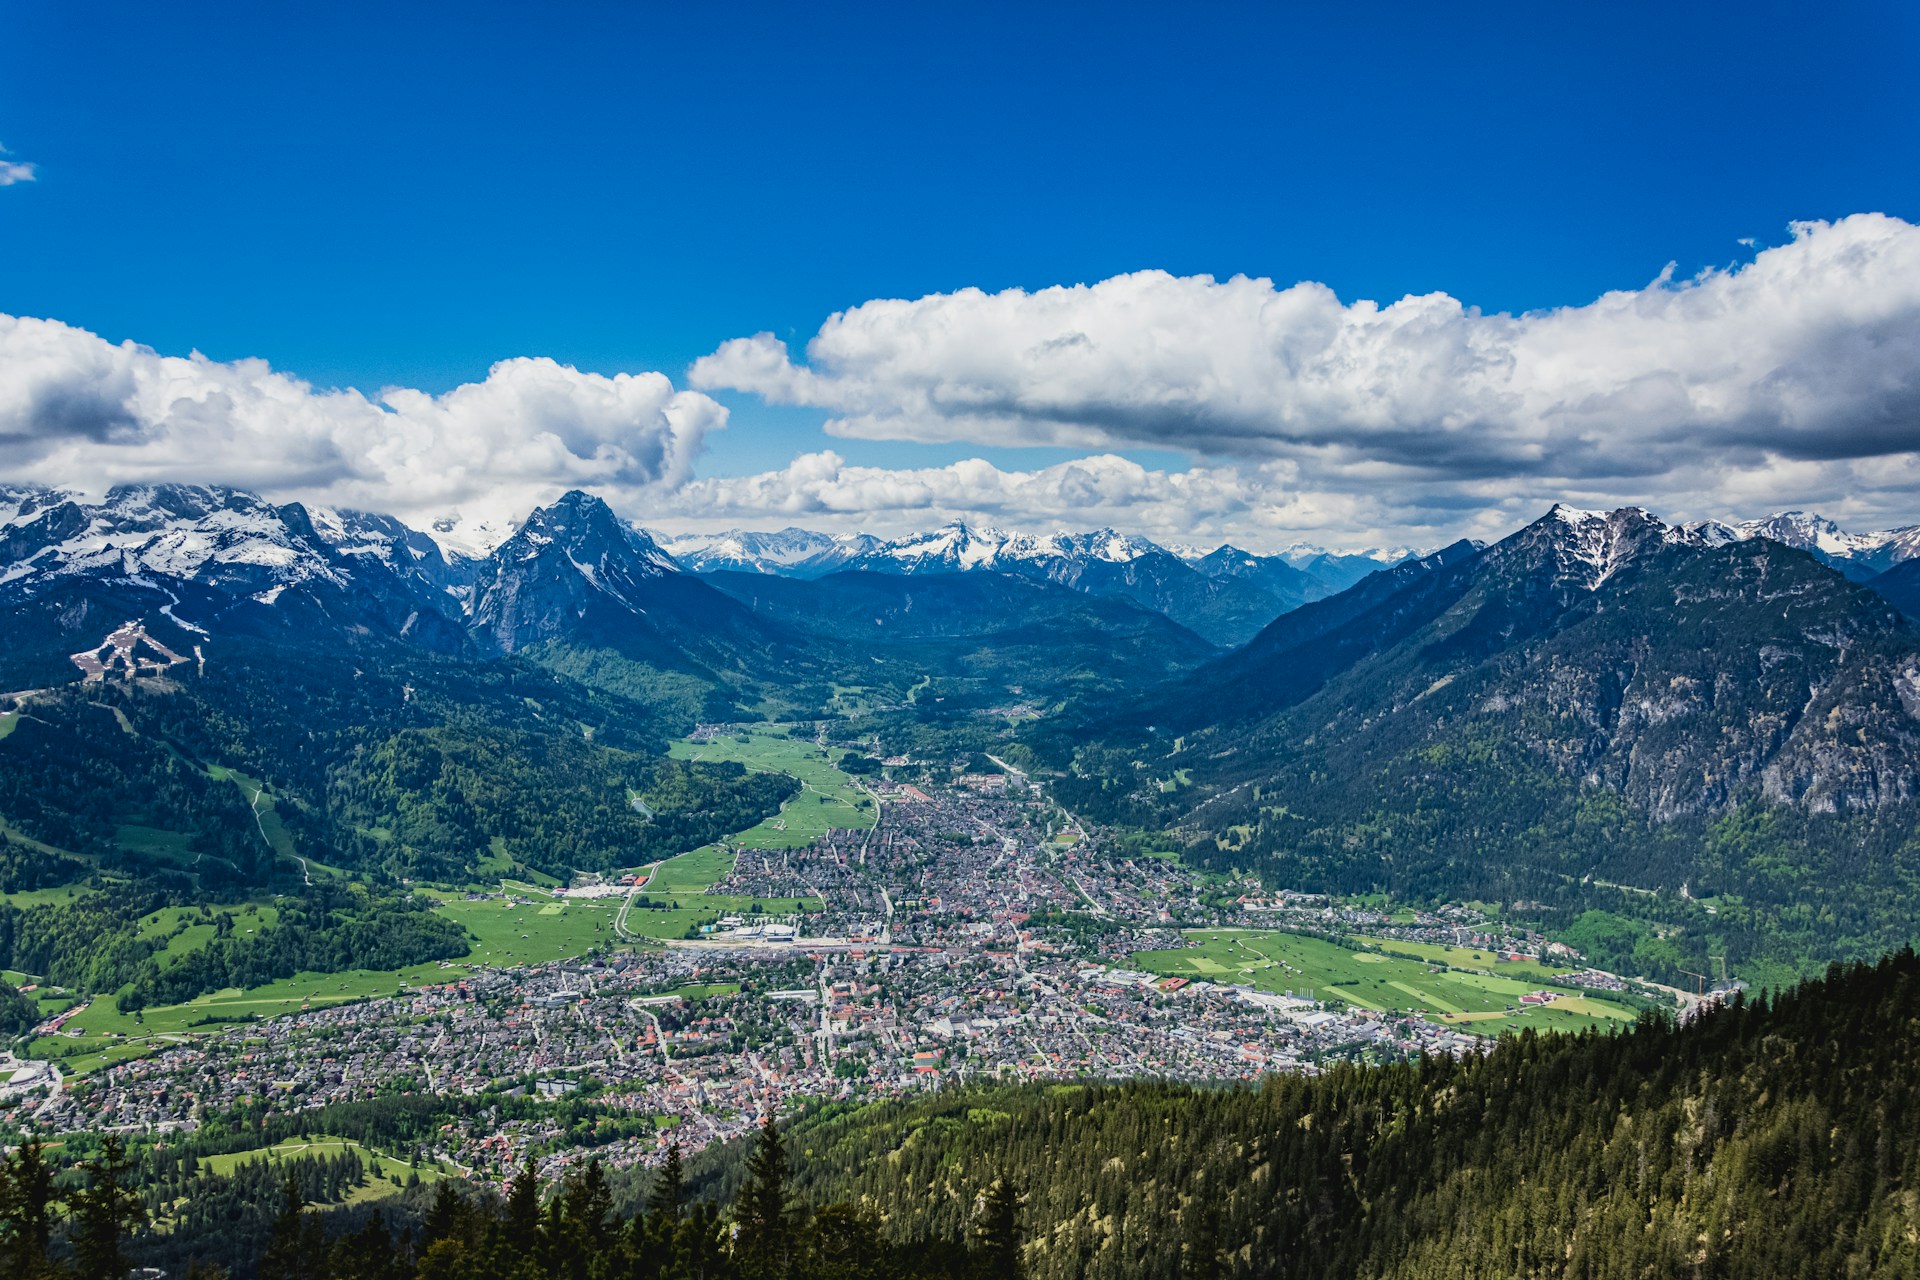 Bavarian Alps Backpacking: History, Peaks, and Hidden Trails